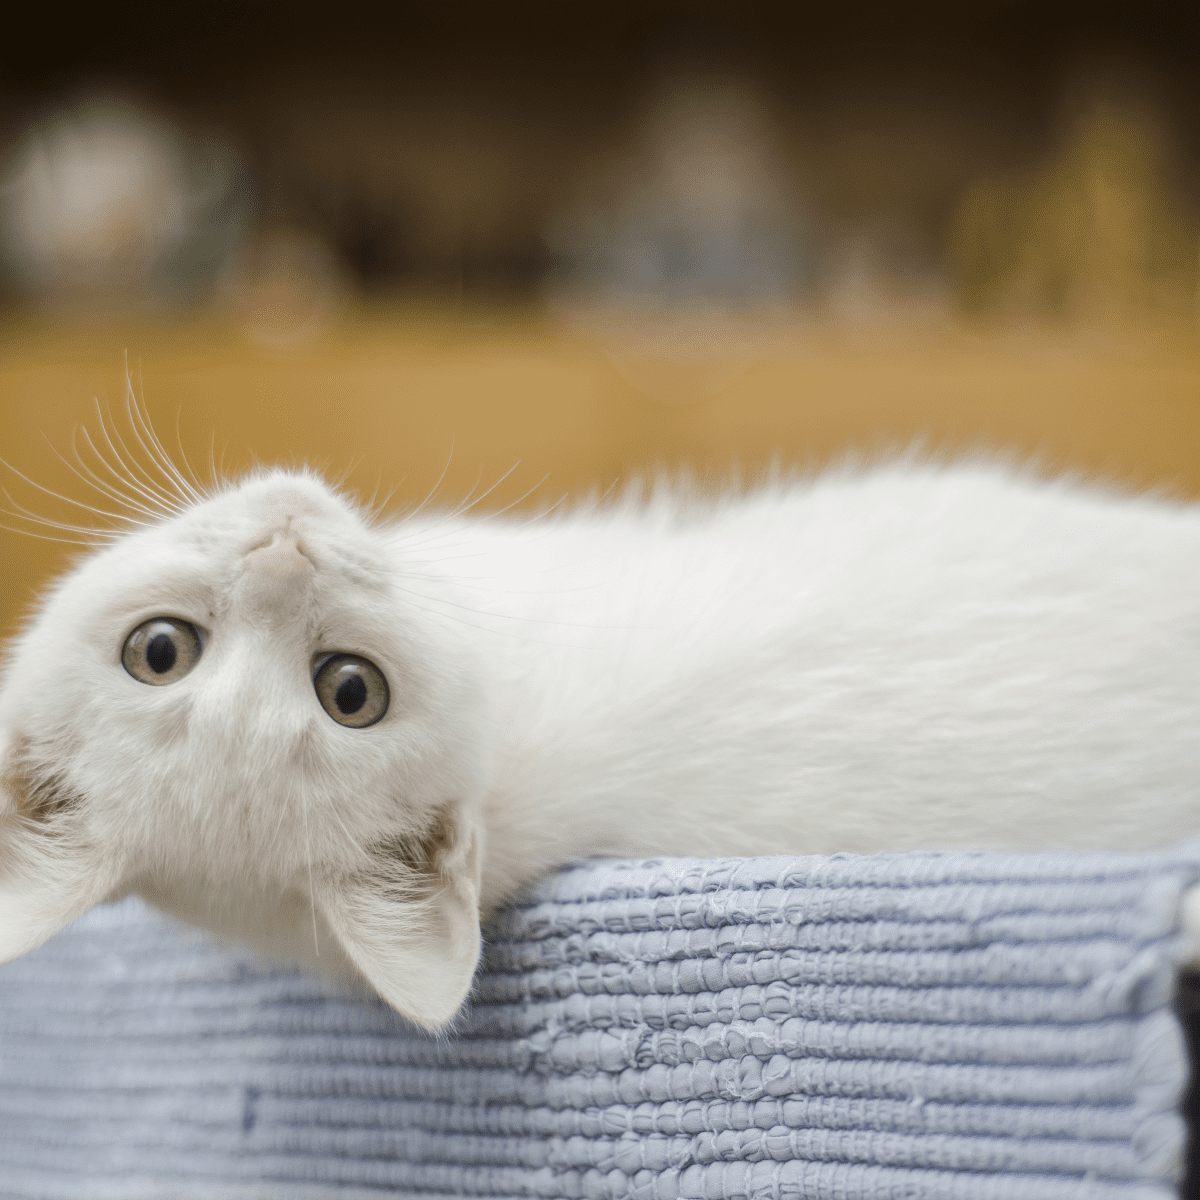 150 Cute Cat Quotes and Sayings - PetHelpful